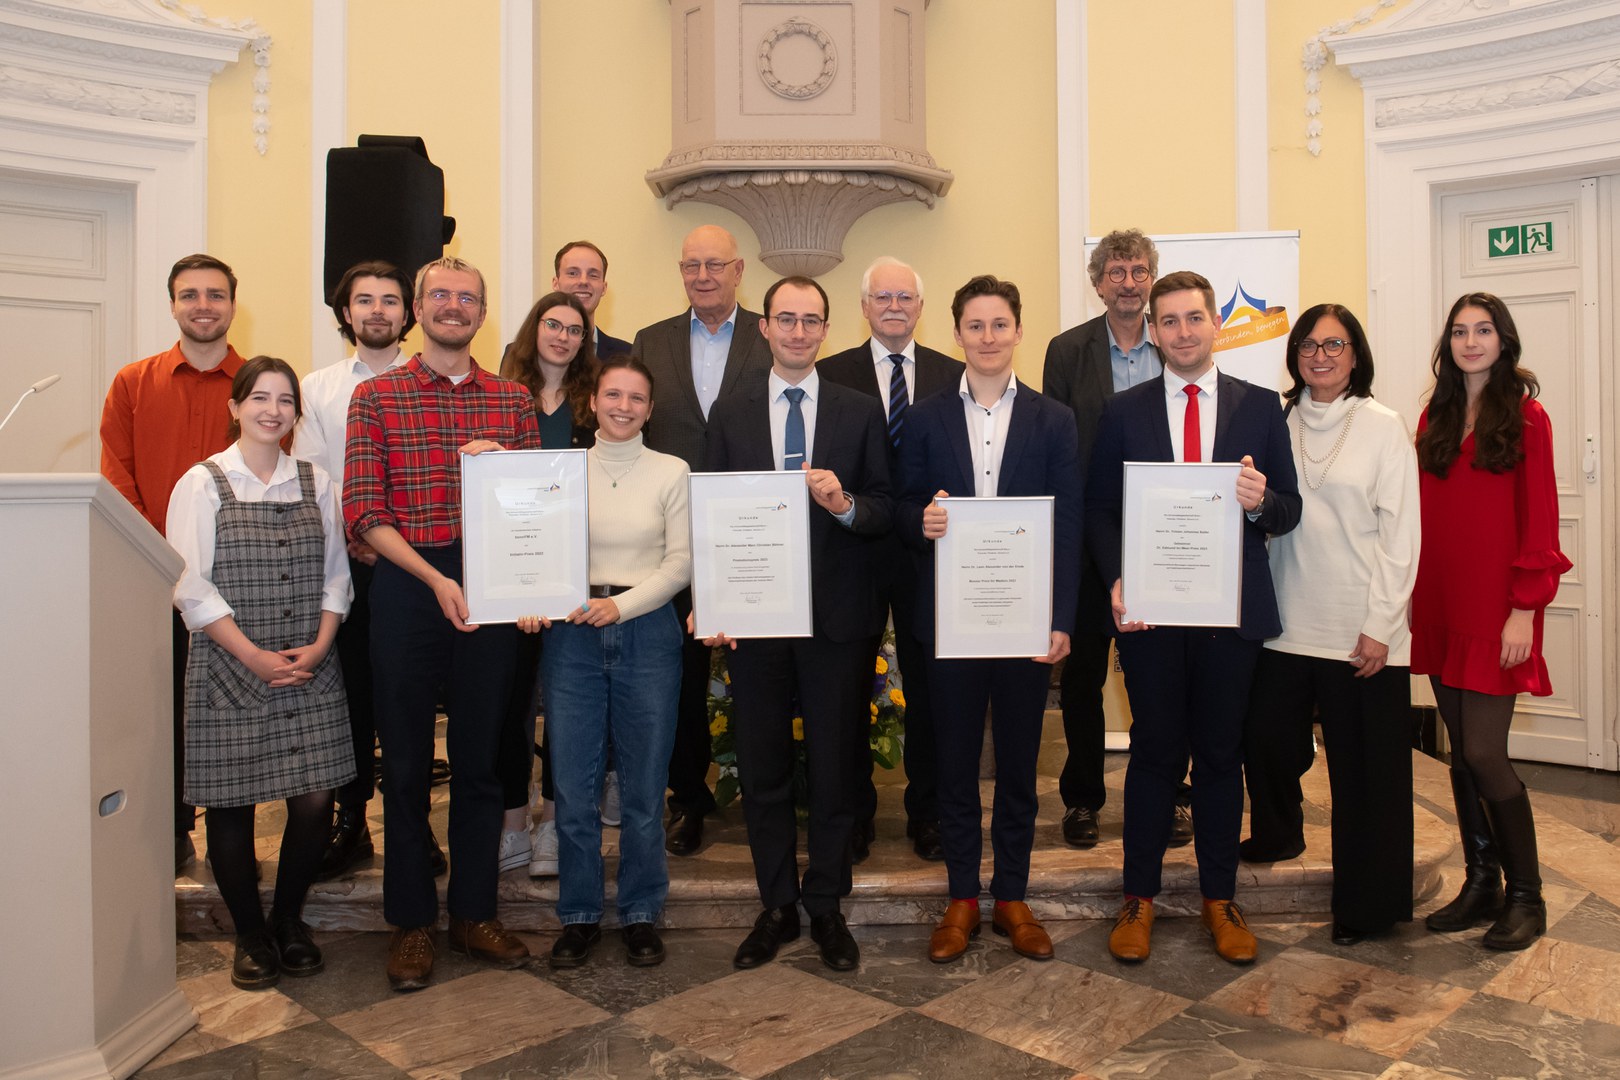 The Universitätsgesellschaft Bonn has recognized exceptional doctoral theses and student engagement